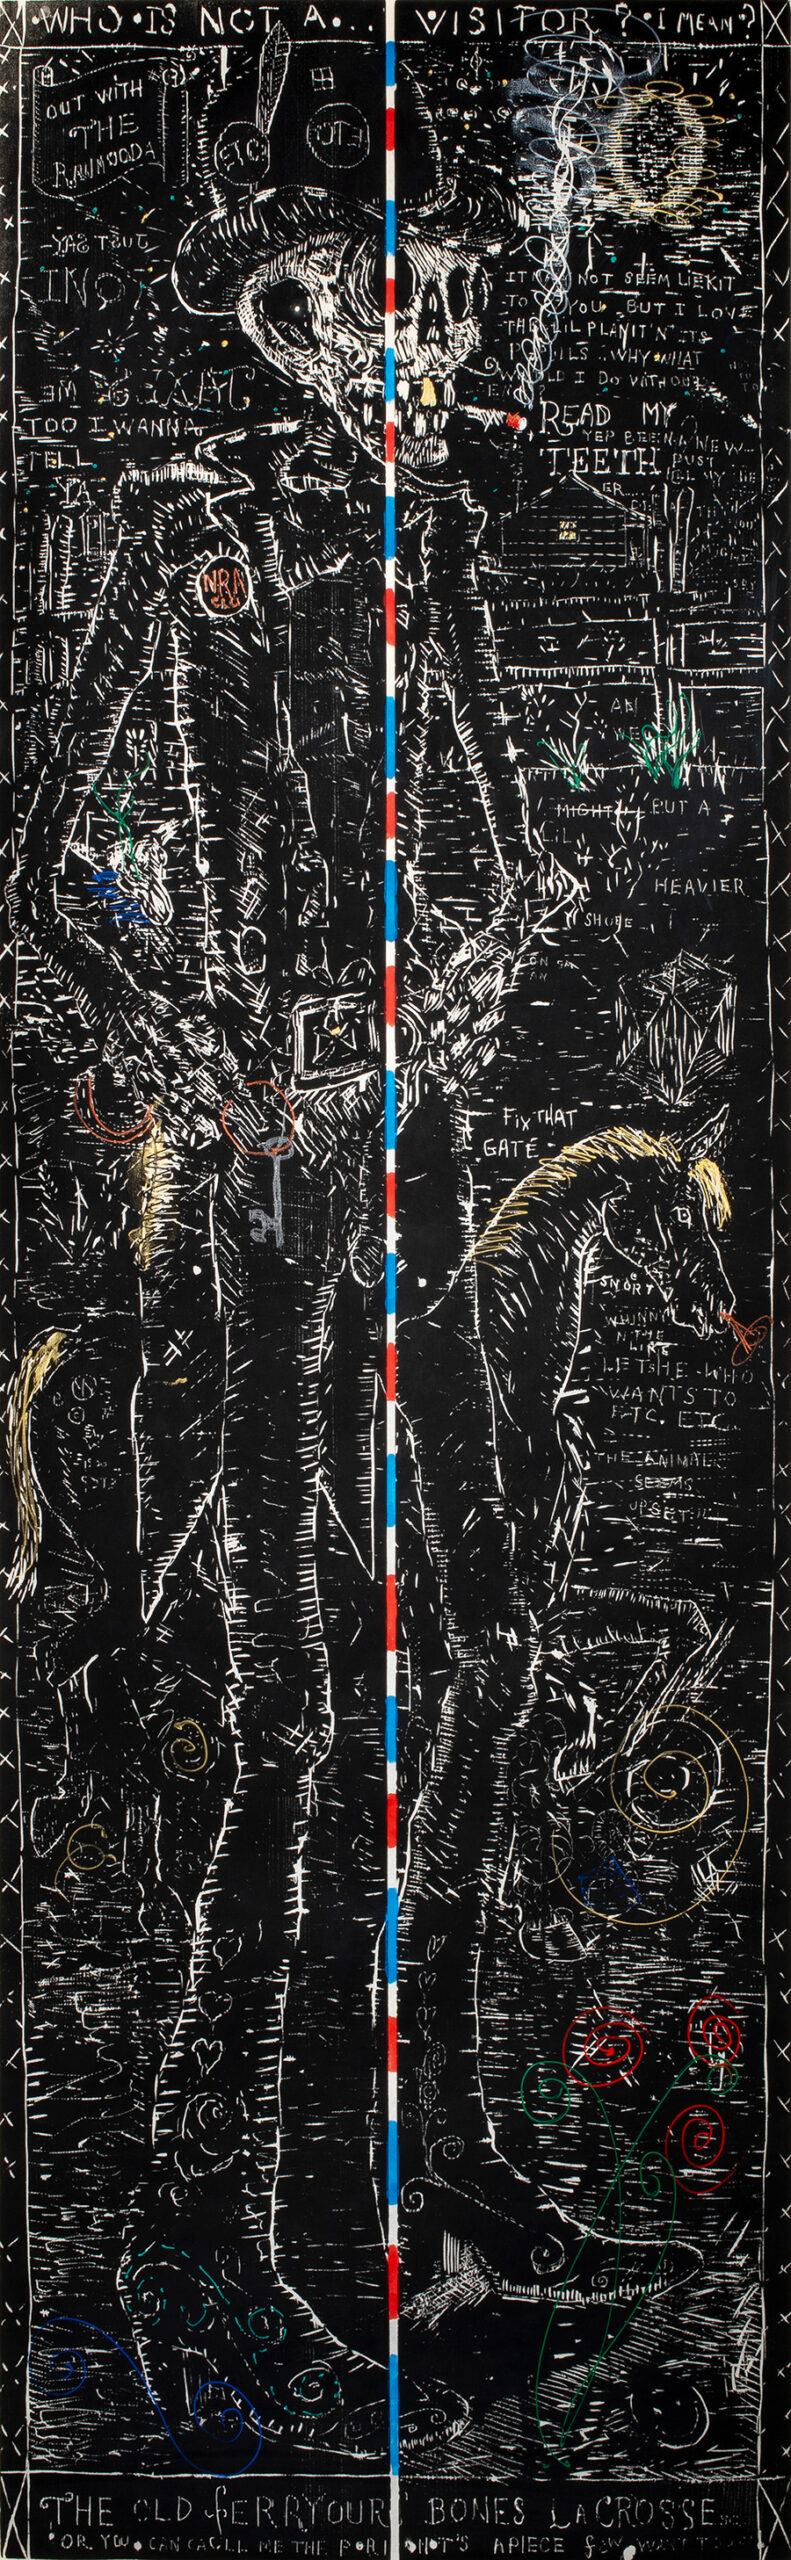 William T. Wiley, (American, 1937–2021), Mr. Bones, 1989, woodcut with hand coloring, 74&#8243 x 23&#8243.